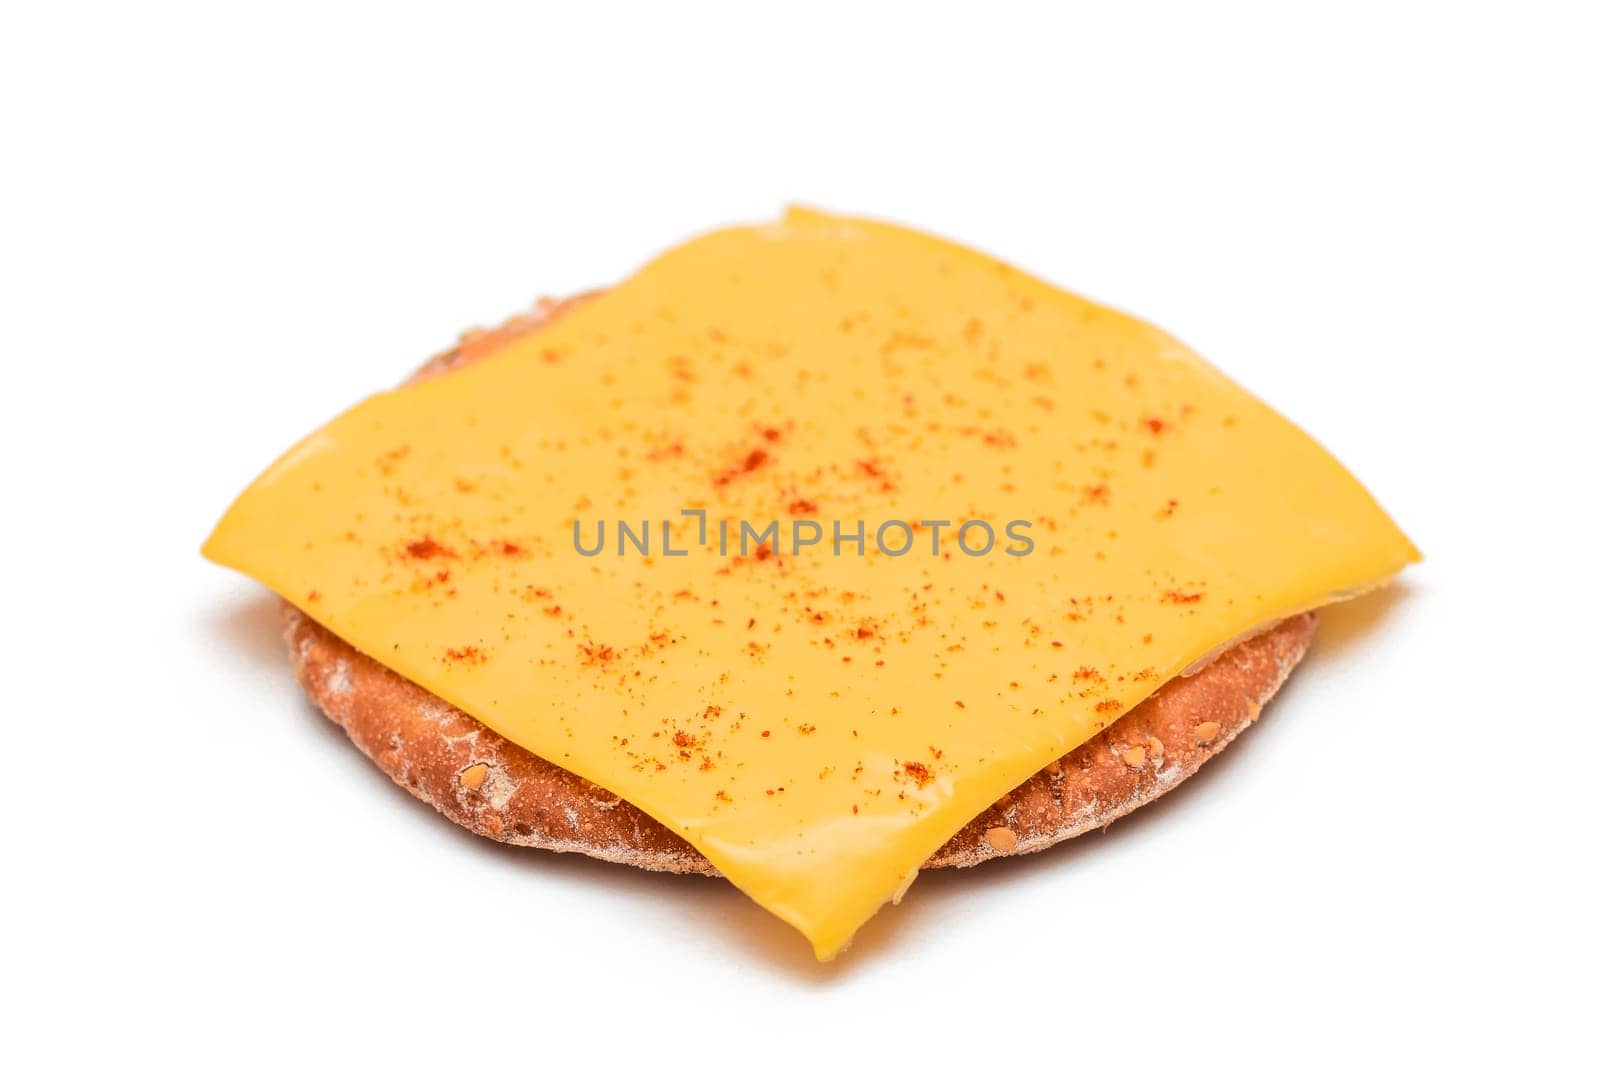 Crispy Cracker Sandwich with Cheese and Paprika - Isolated on White